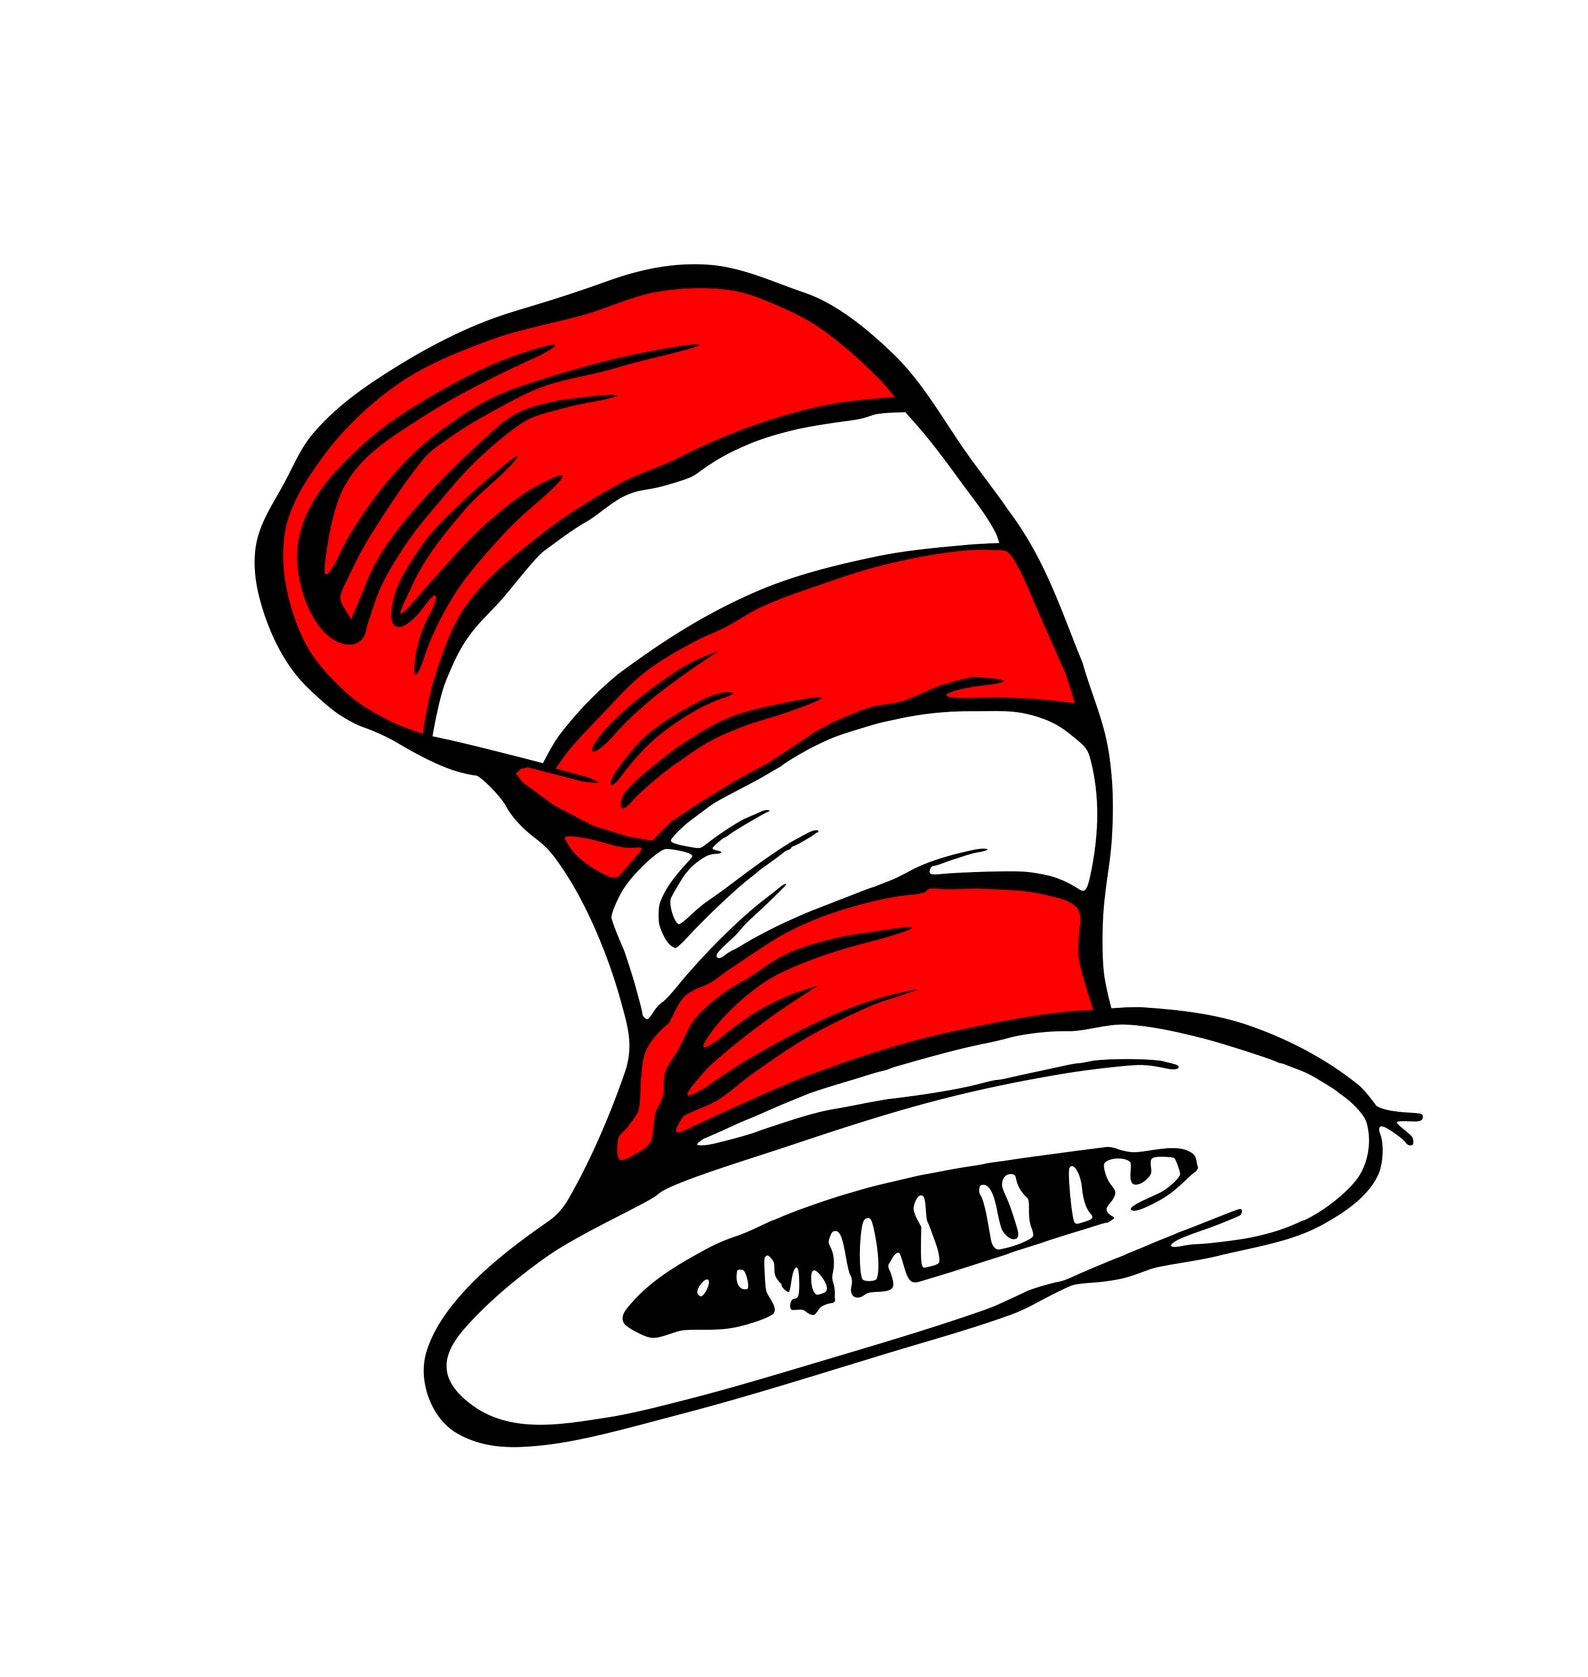 Cat in the Hat Related SVG Files - Etsy